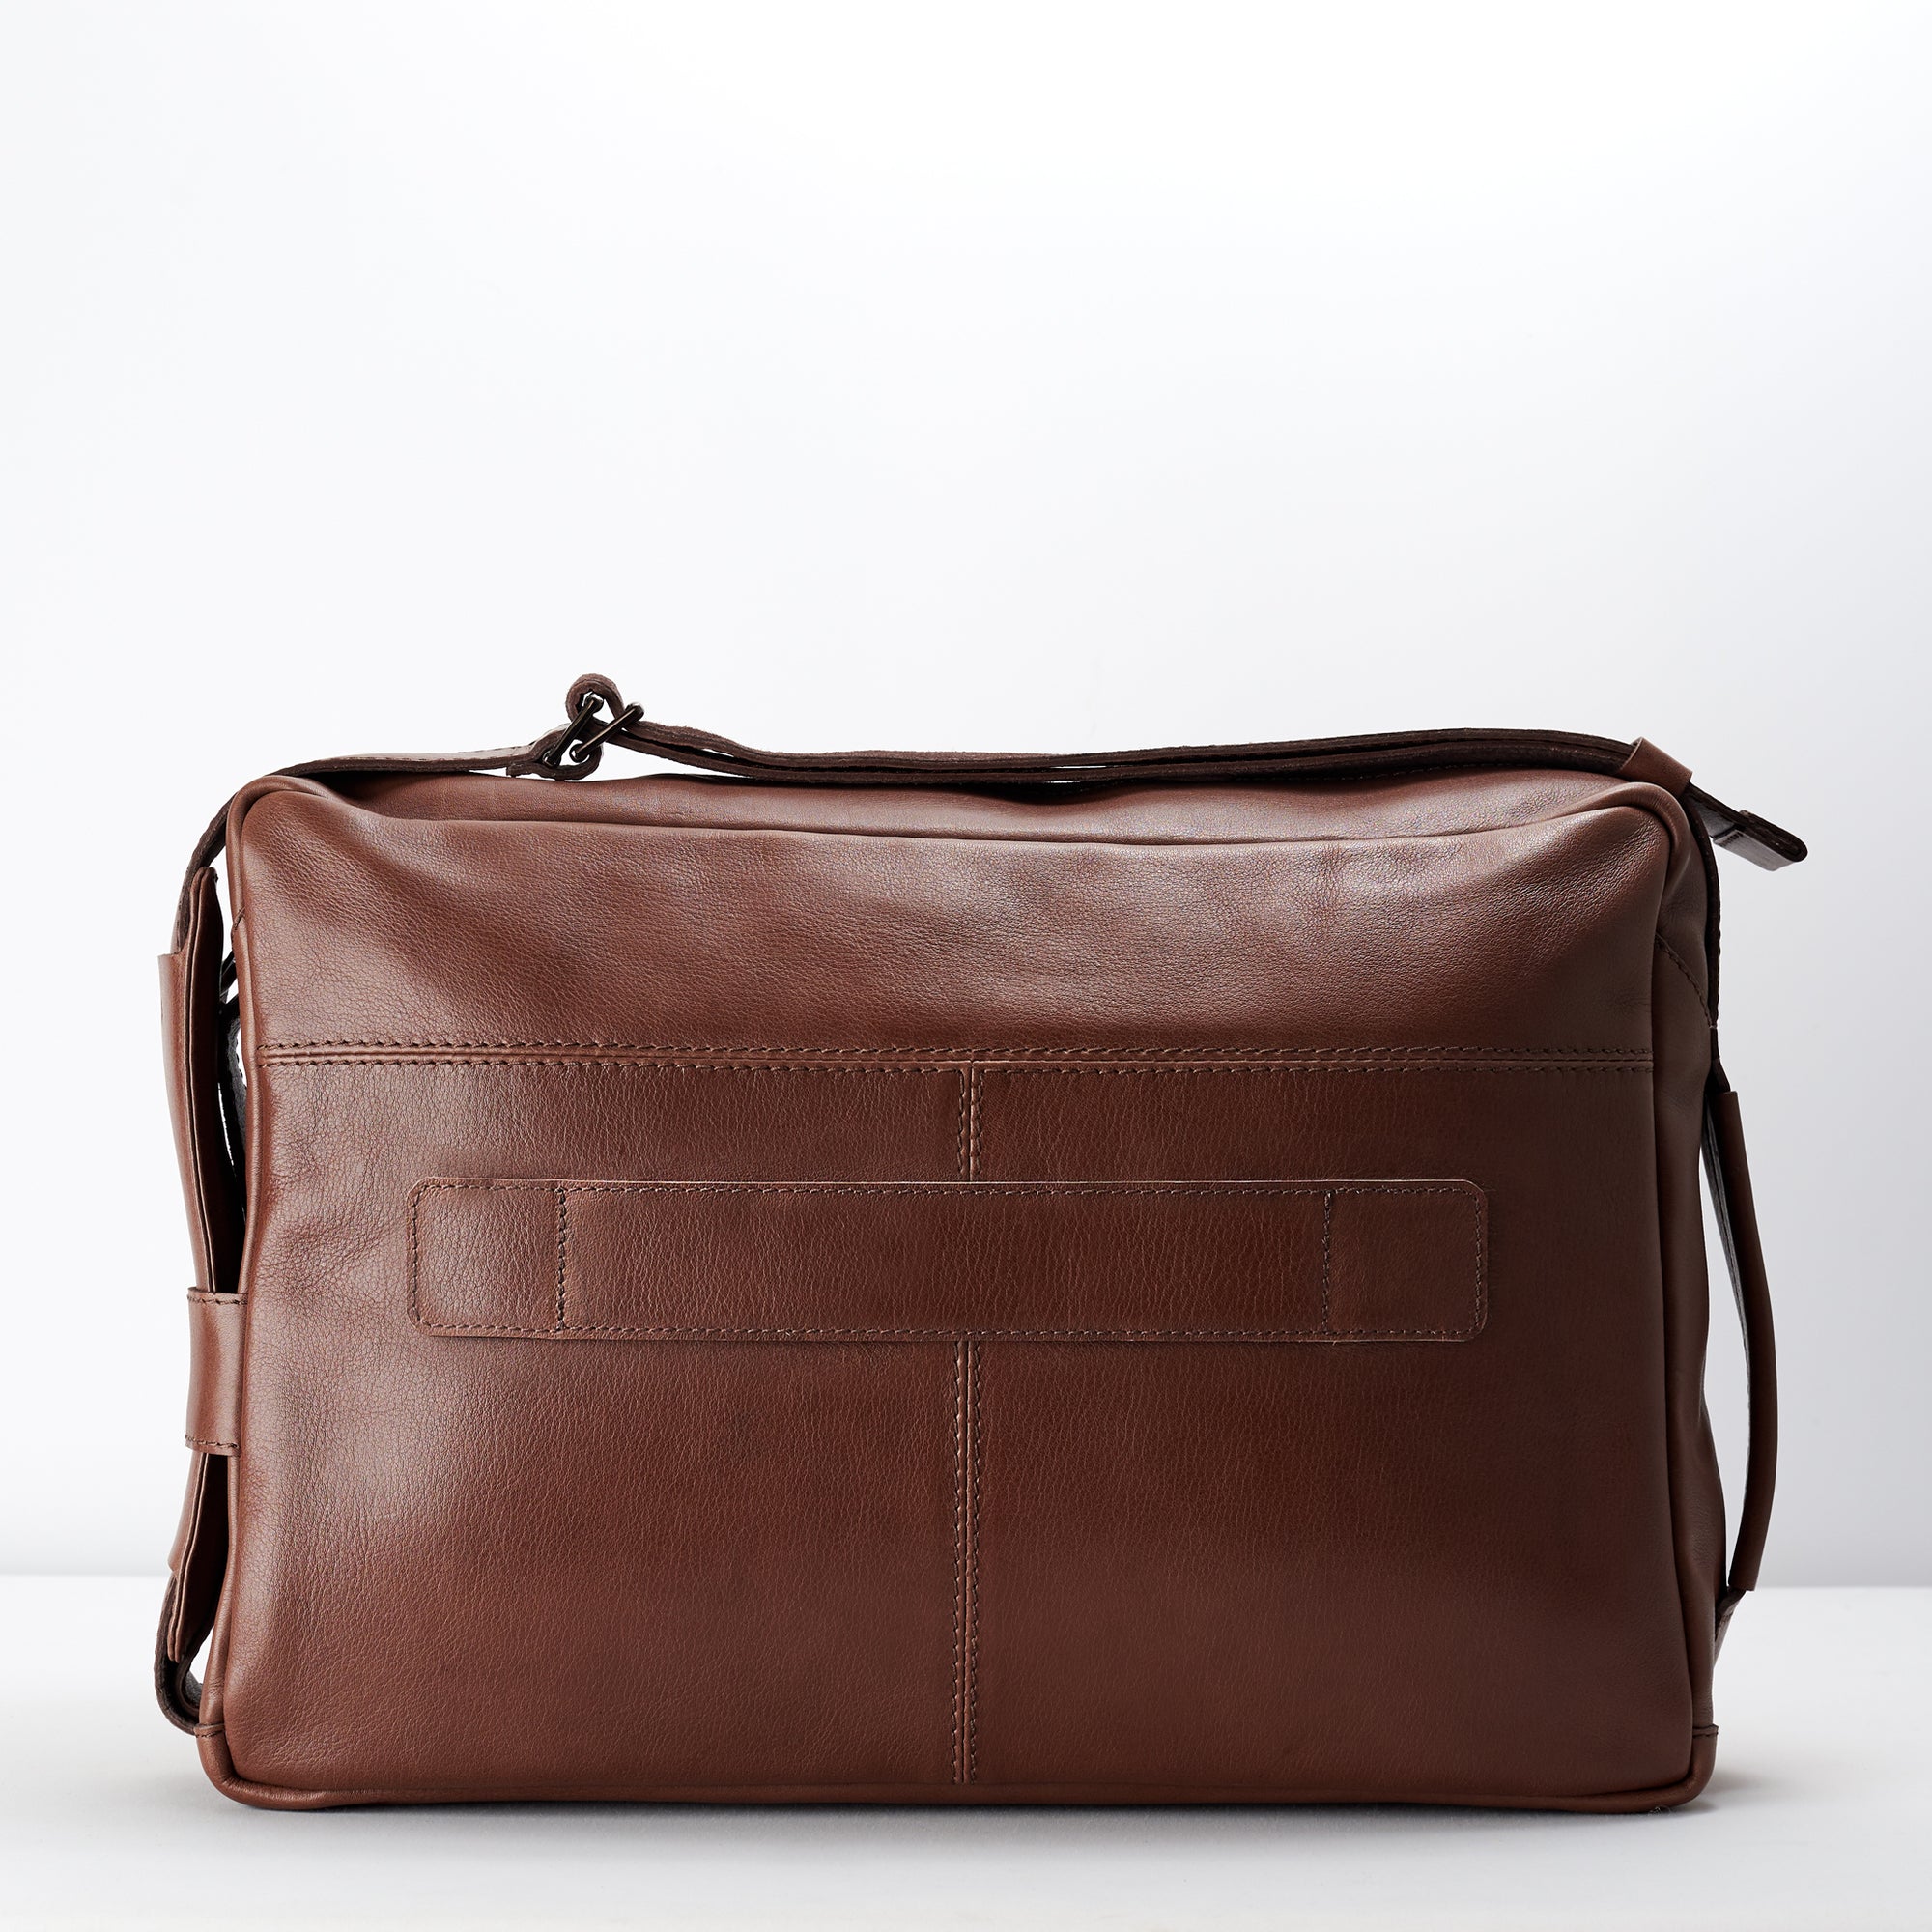 Luggage handle. Brown handmade leather messenger bag for men. Commuter bag, laptop leather bag by Capra Leather.